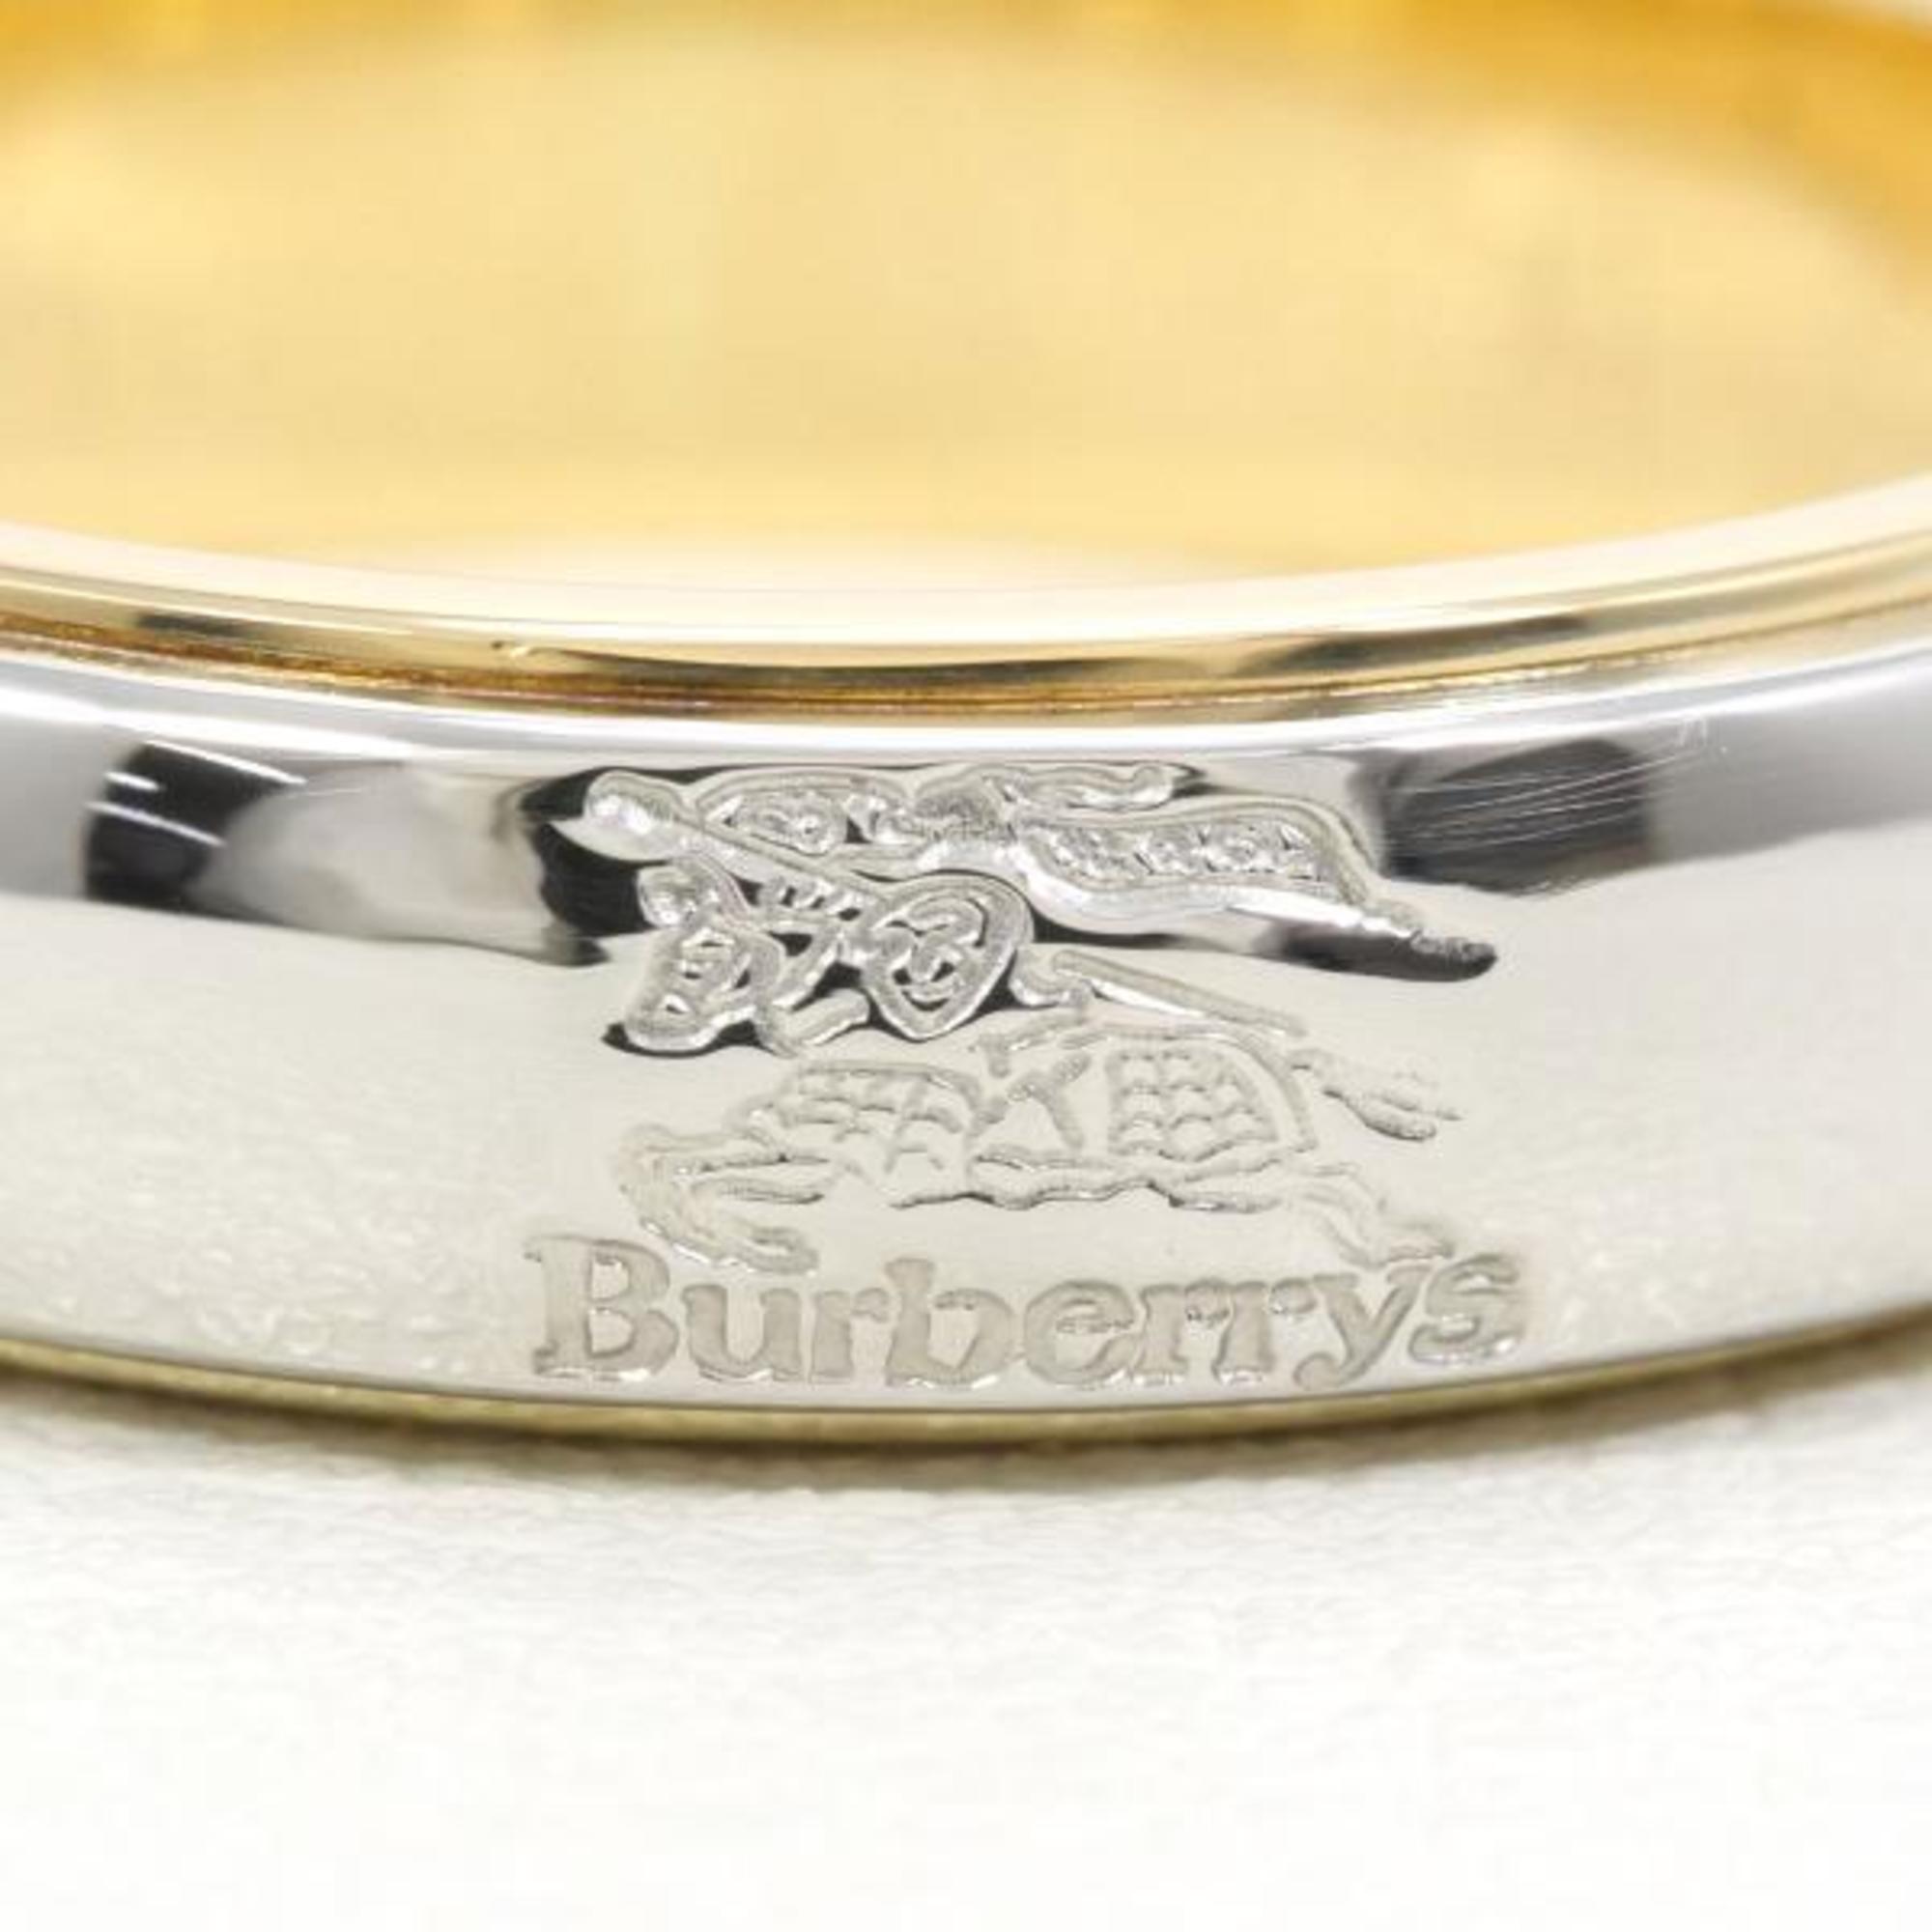 Burberry PT900 K18YG Ring Total weight approx. 8.9g